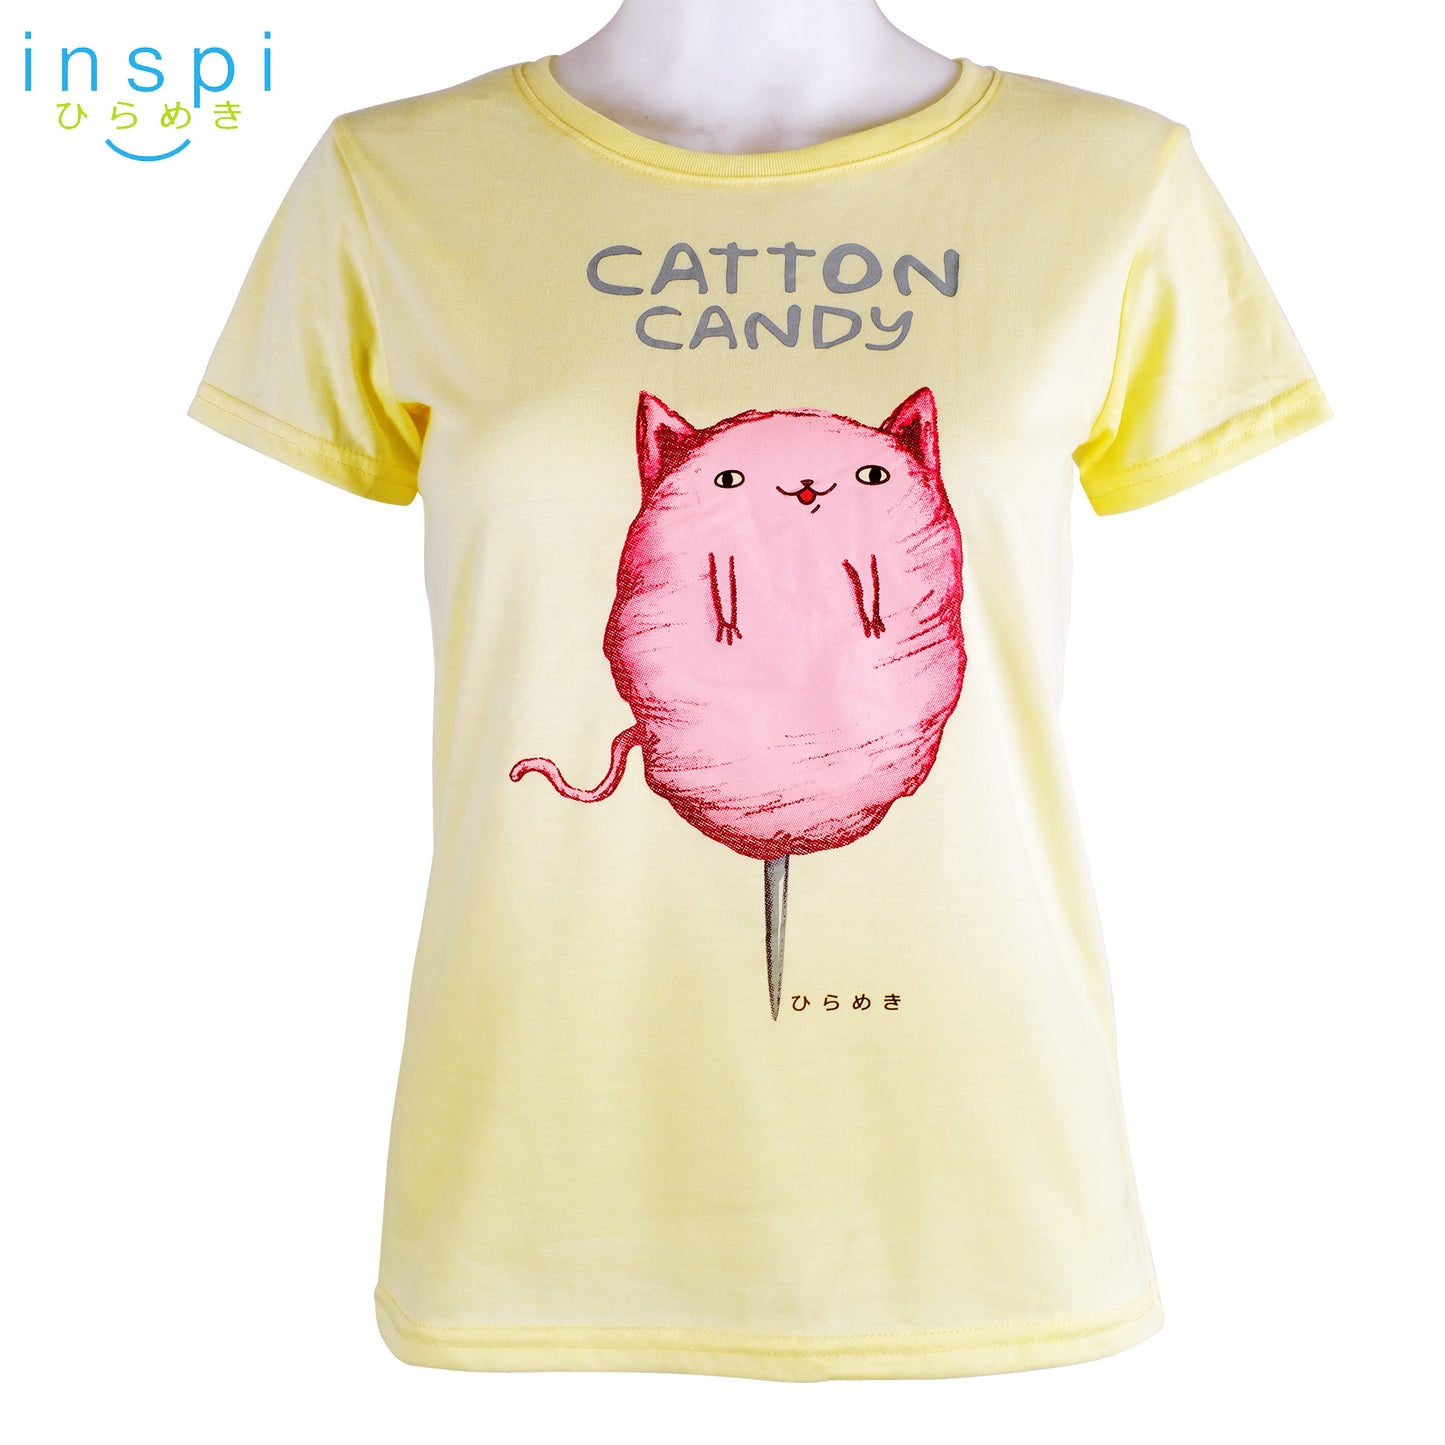 INSPI Tees Ladies Catton Candy Graphic Tshirt